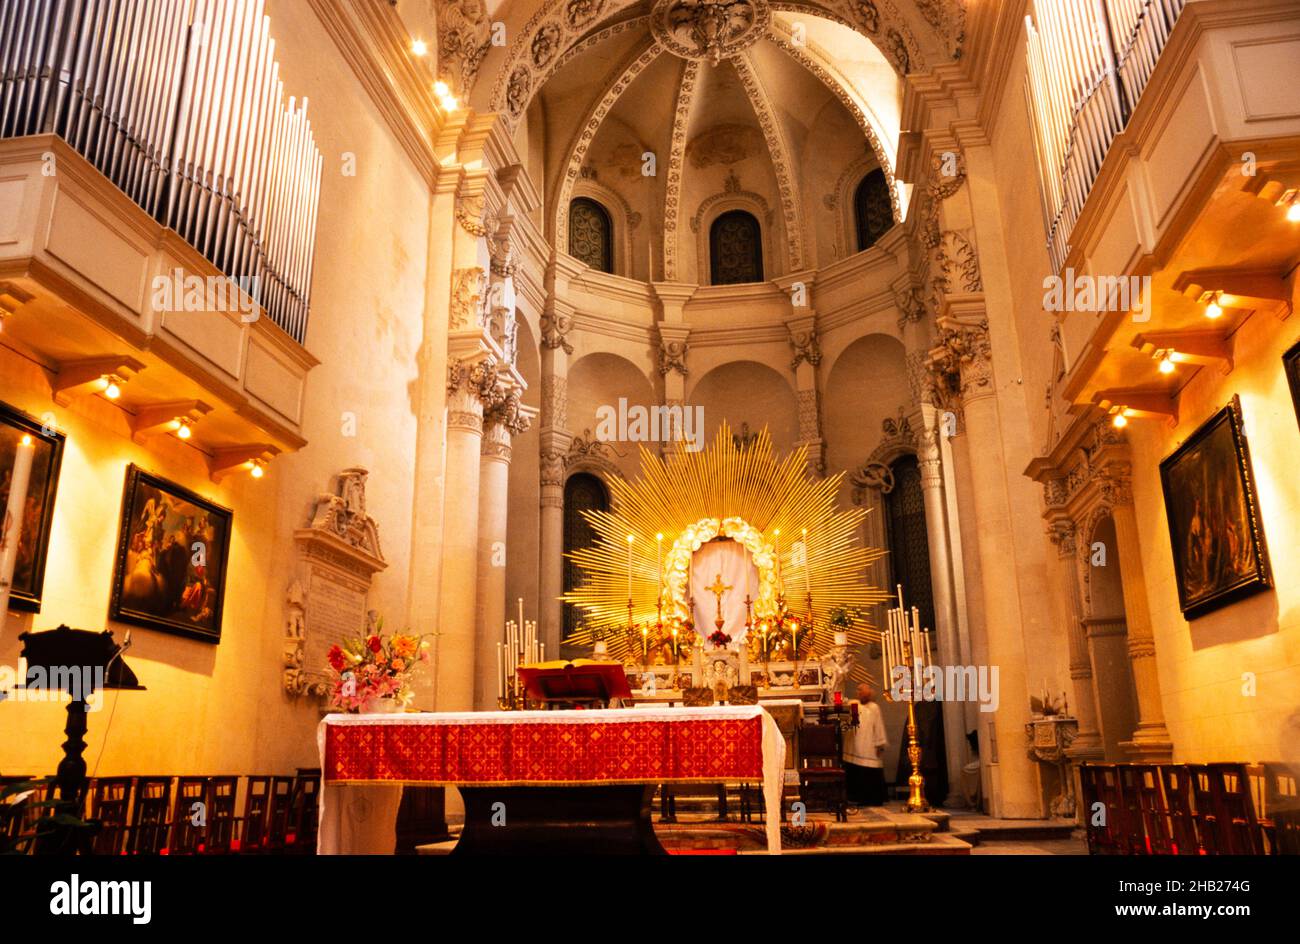 Interior of cathedral Assumption of the Virgin Mary church Lecce, Apulia, Italy in 1999 Stock Photo